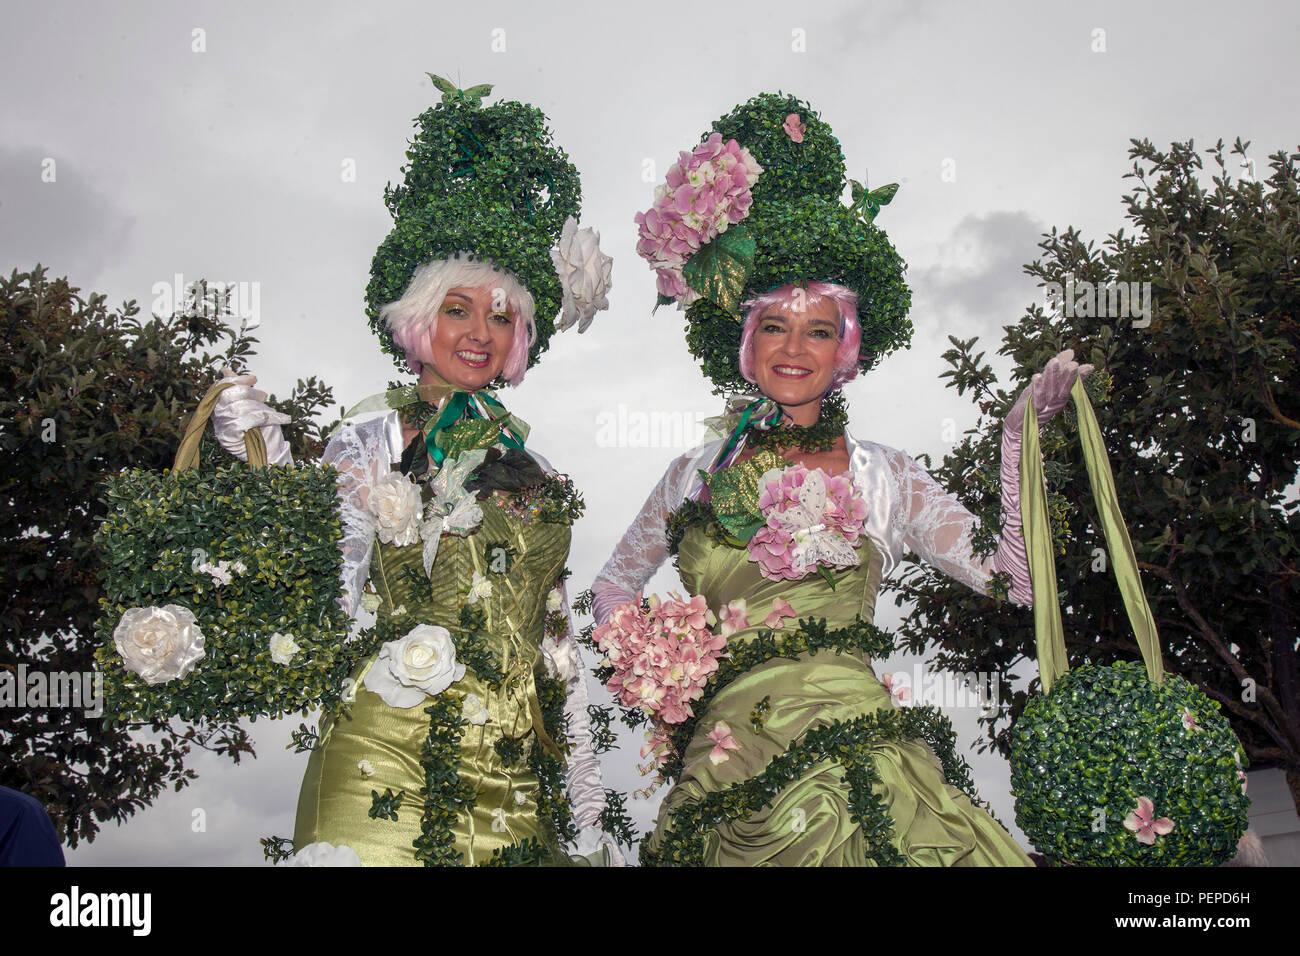 Southport, Merseyside, UK. 17th Aug, 2018. The Topiary Twins stilt walkers at Southport Flower Show as entertainers, exhibitors, garden designers, and floral artists wow the visitors to this famous annual event. Credit; MediaWorldImages/AlamyLiveNews Stock Photo